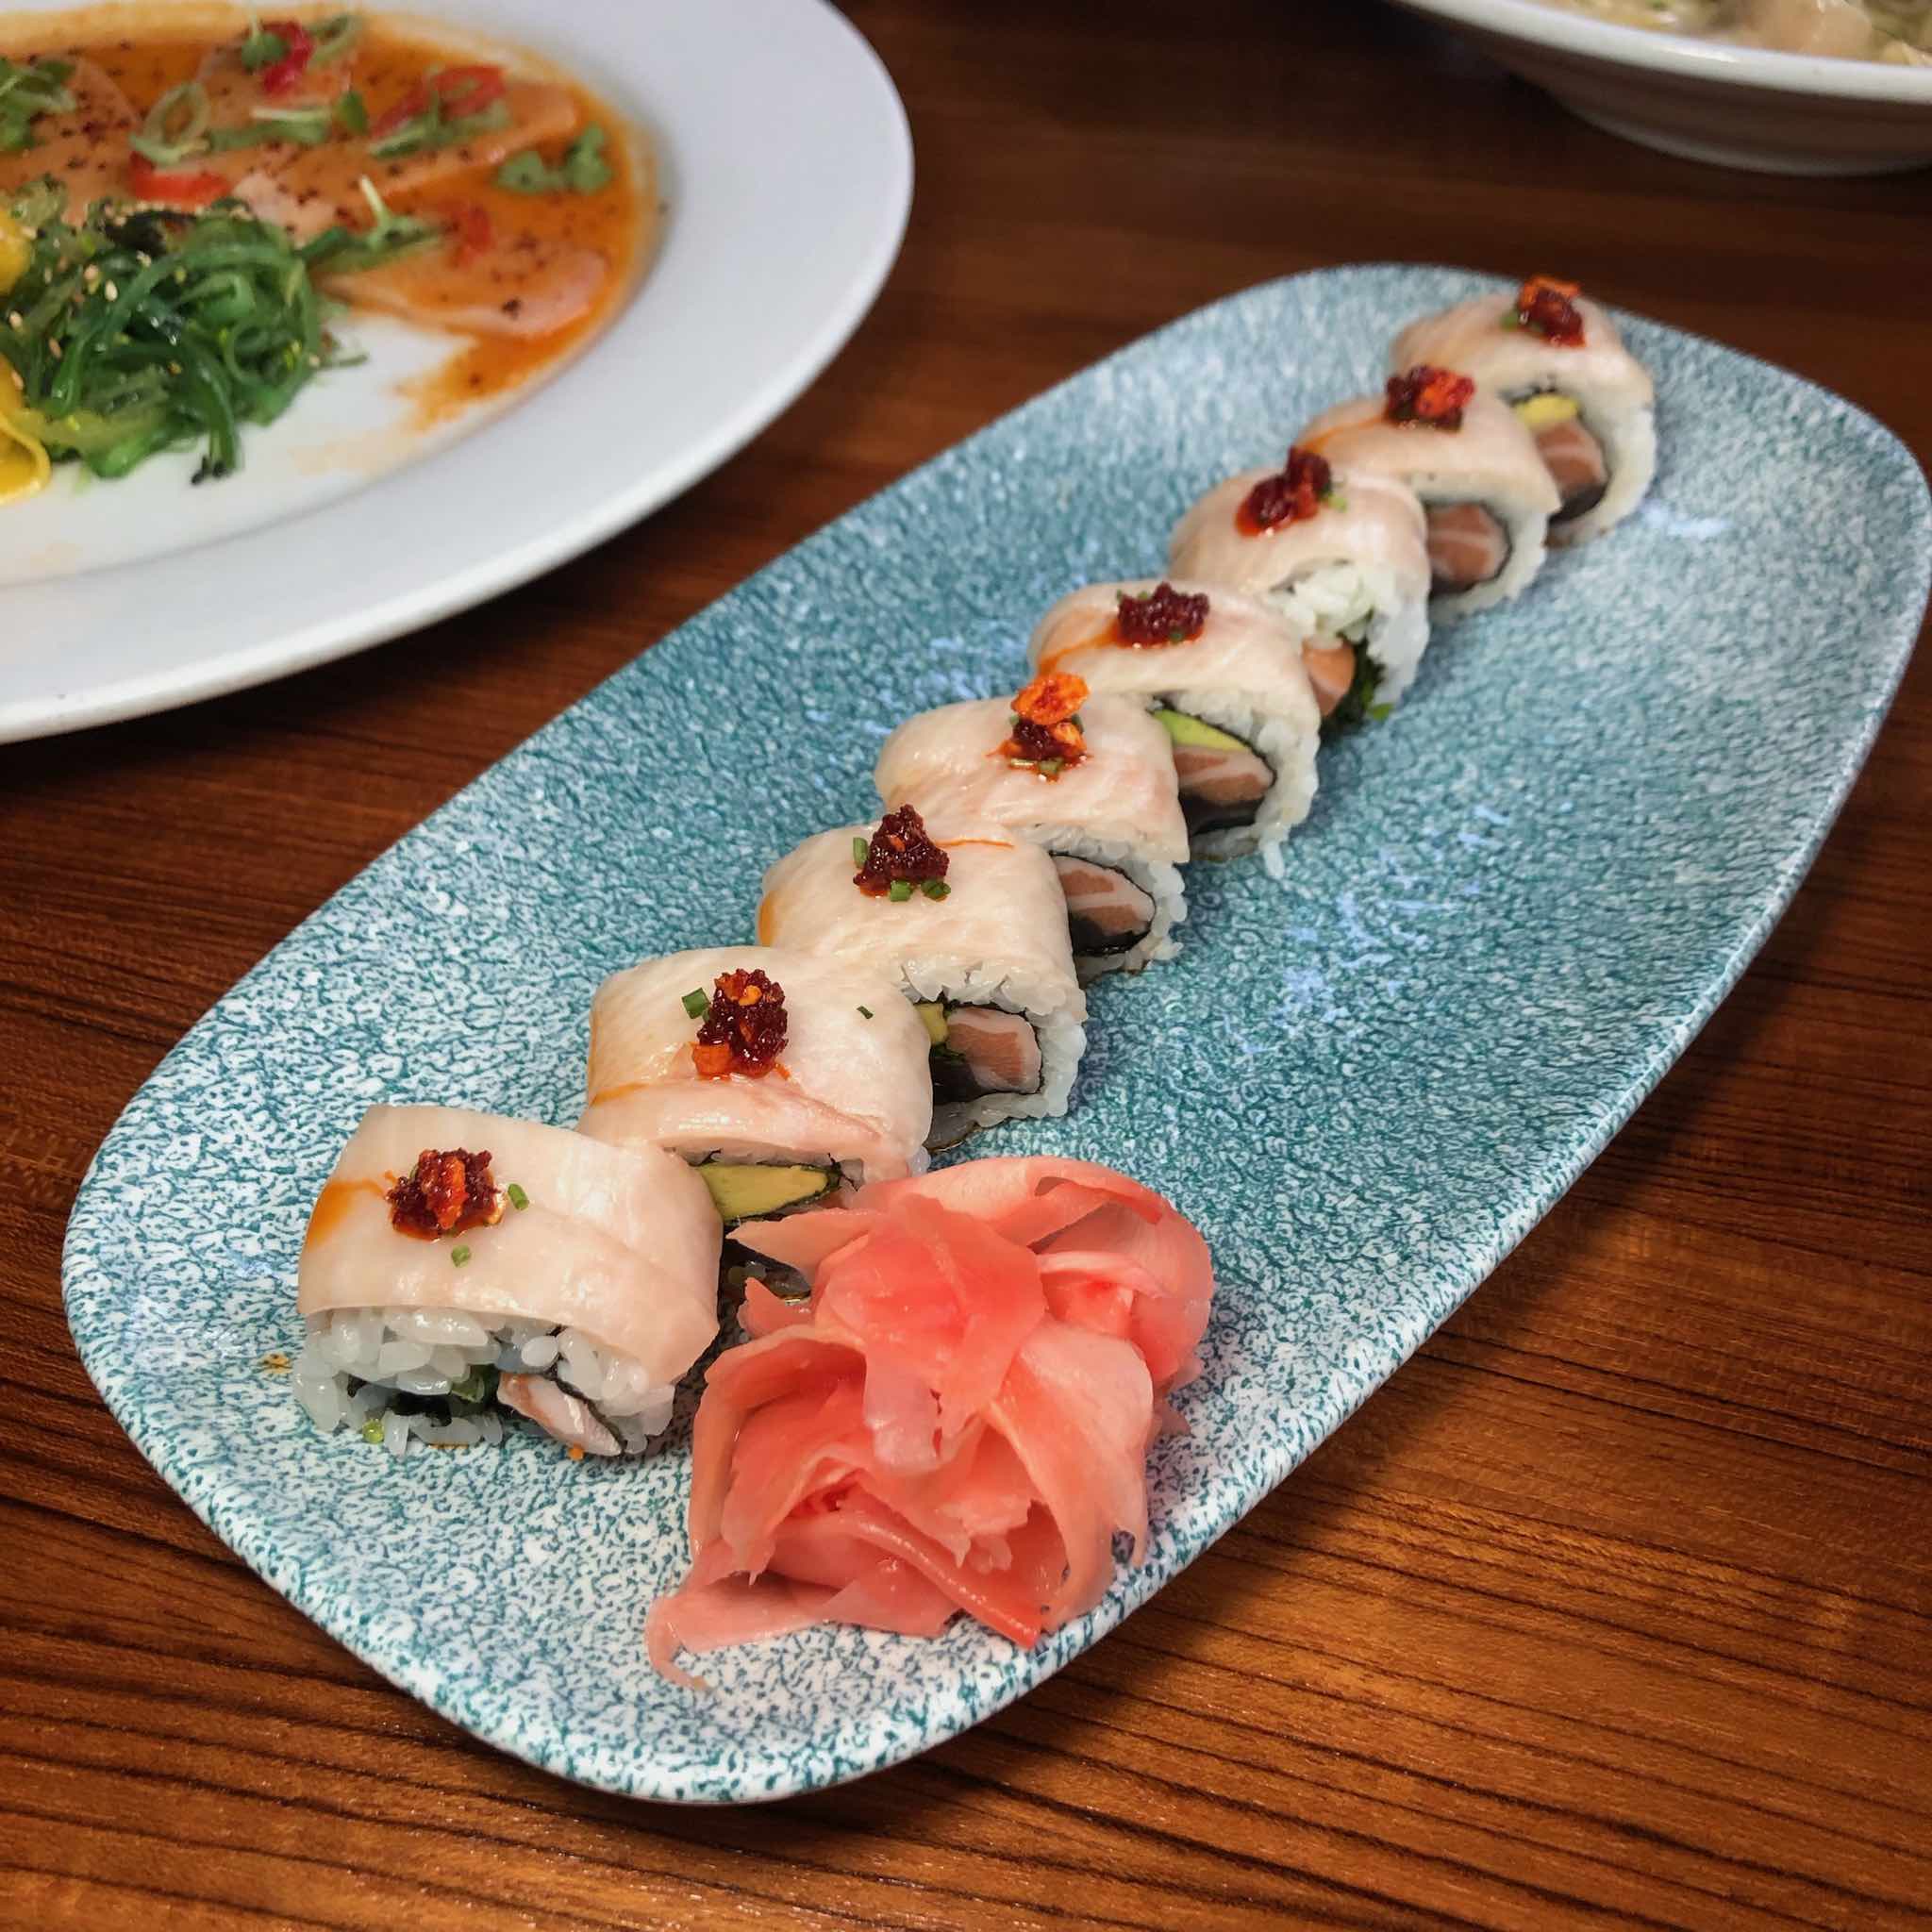 An image of a sushi roll at Ocean Prime.